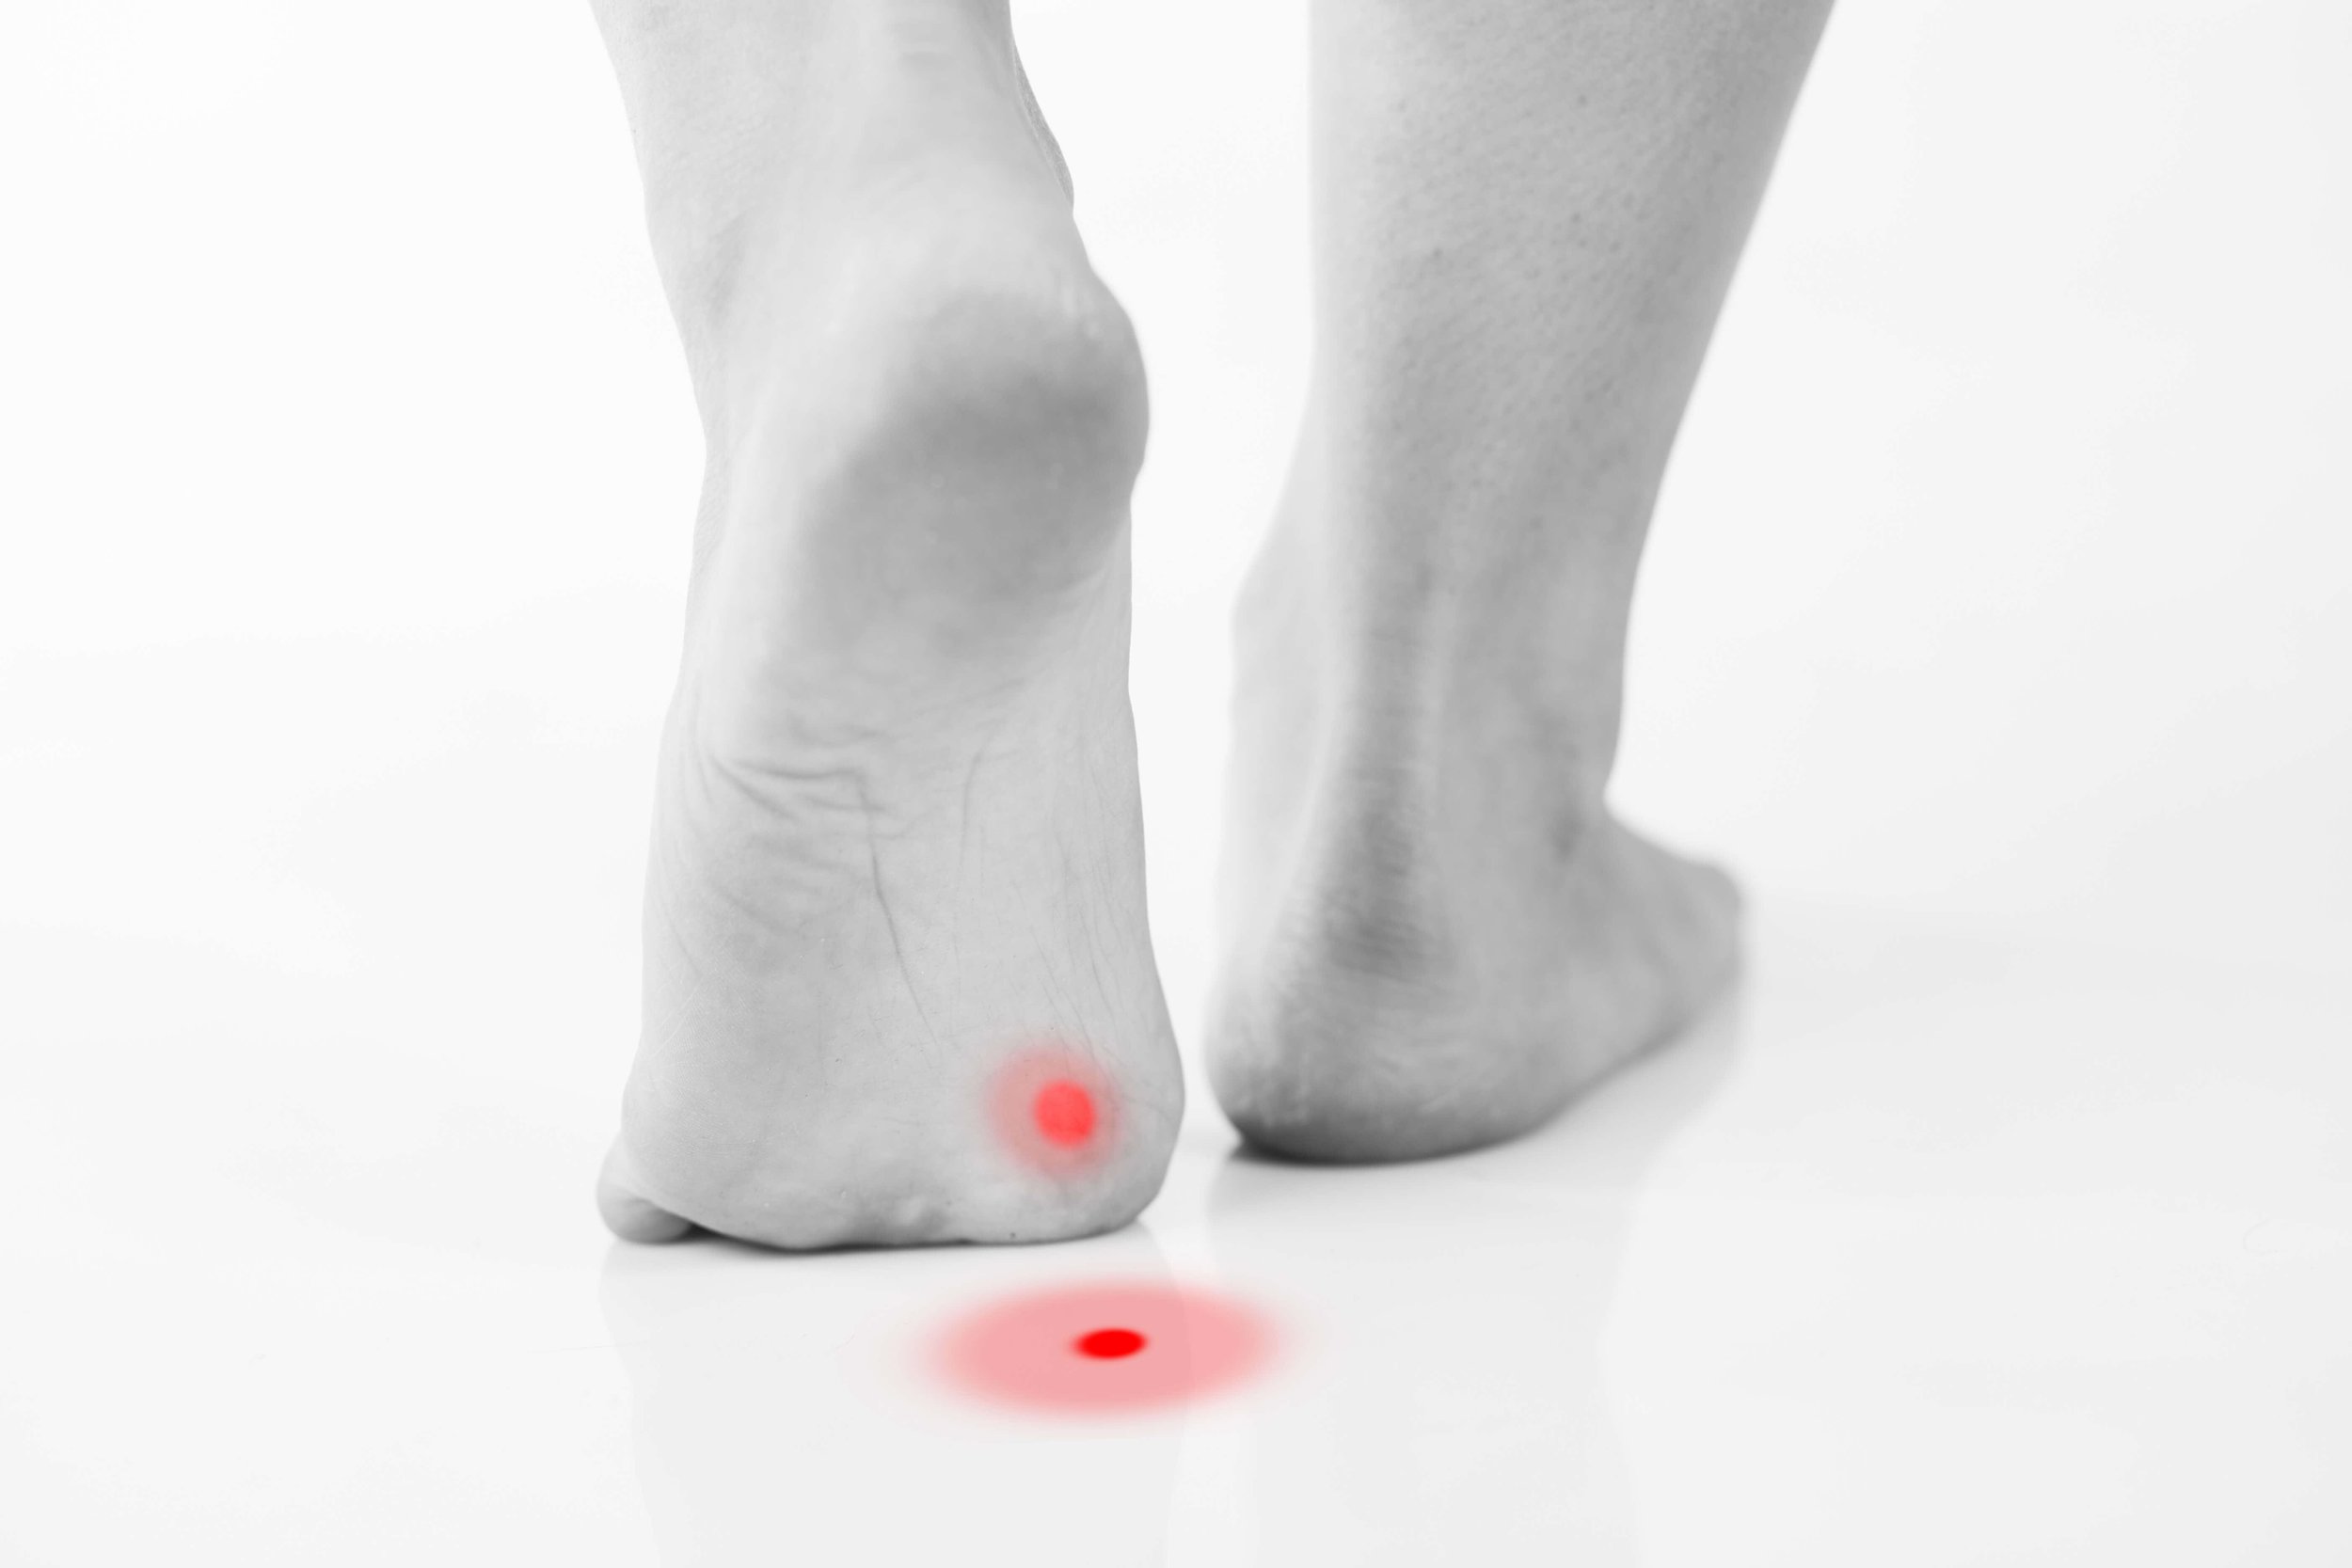 Diabetes and Your Foot Health